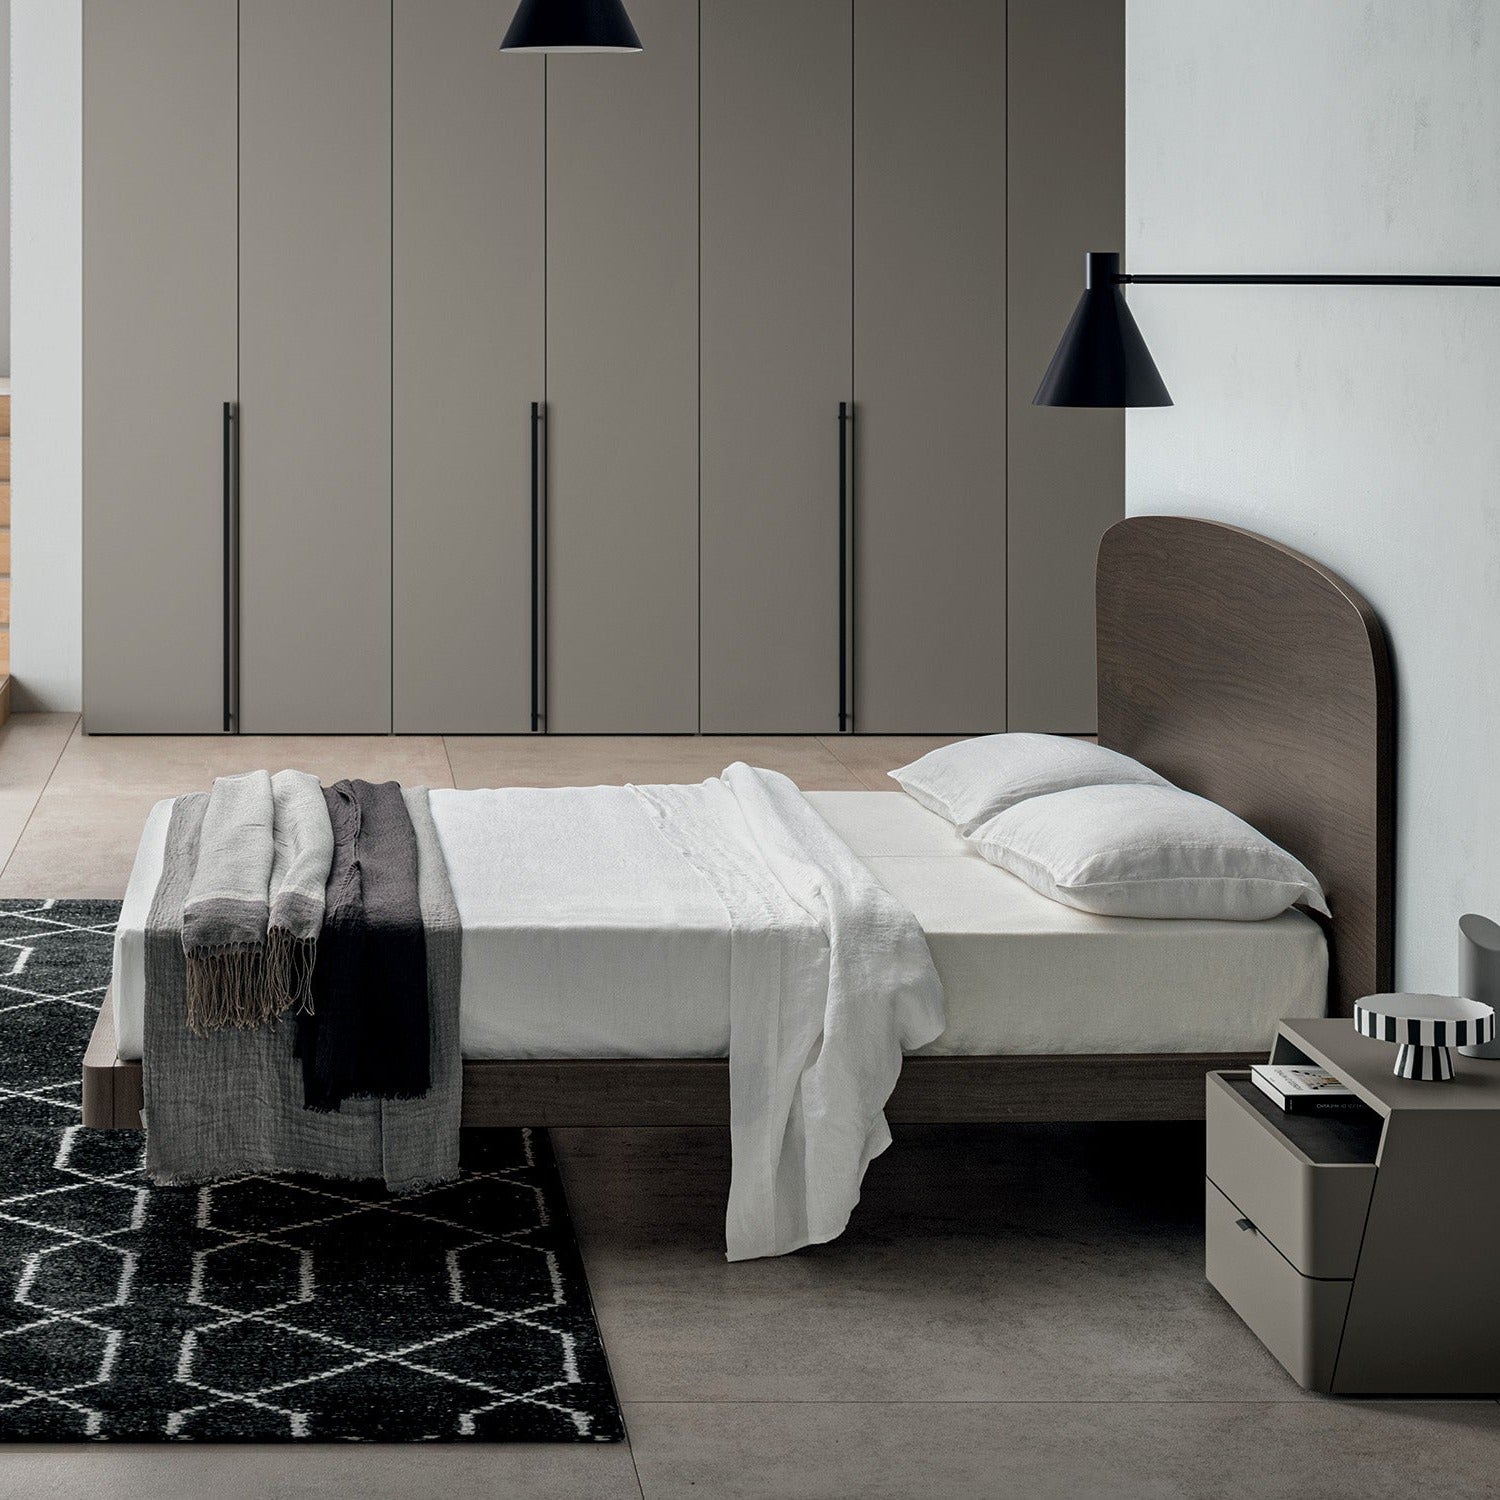 Duran Wooden Bed by Santa Lucia